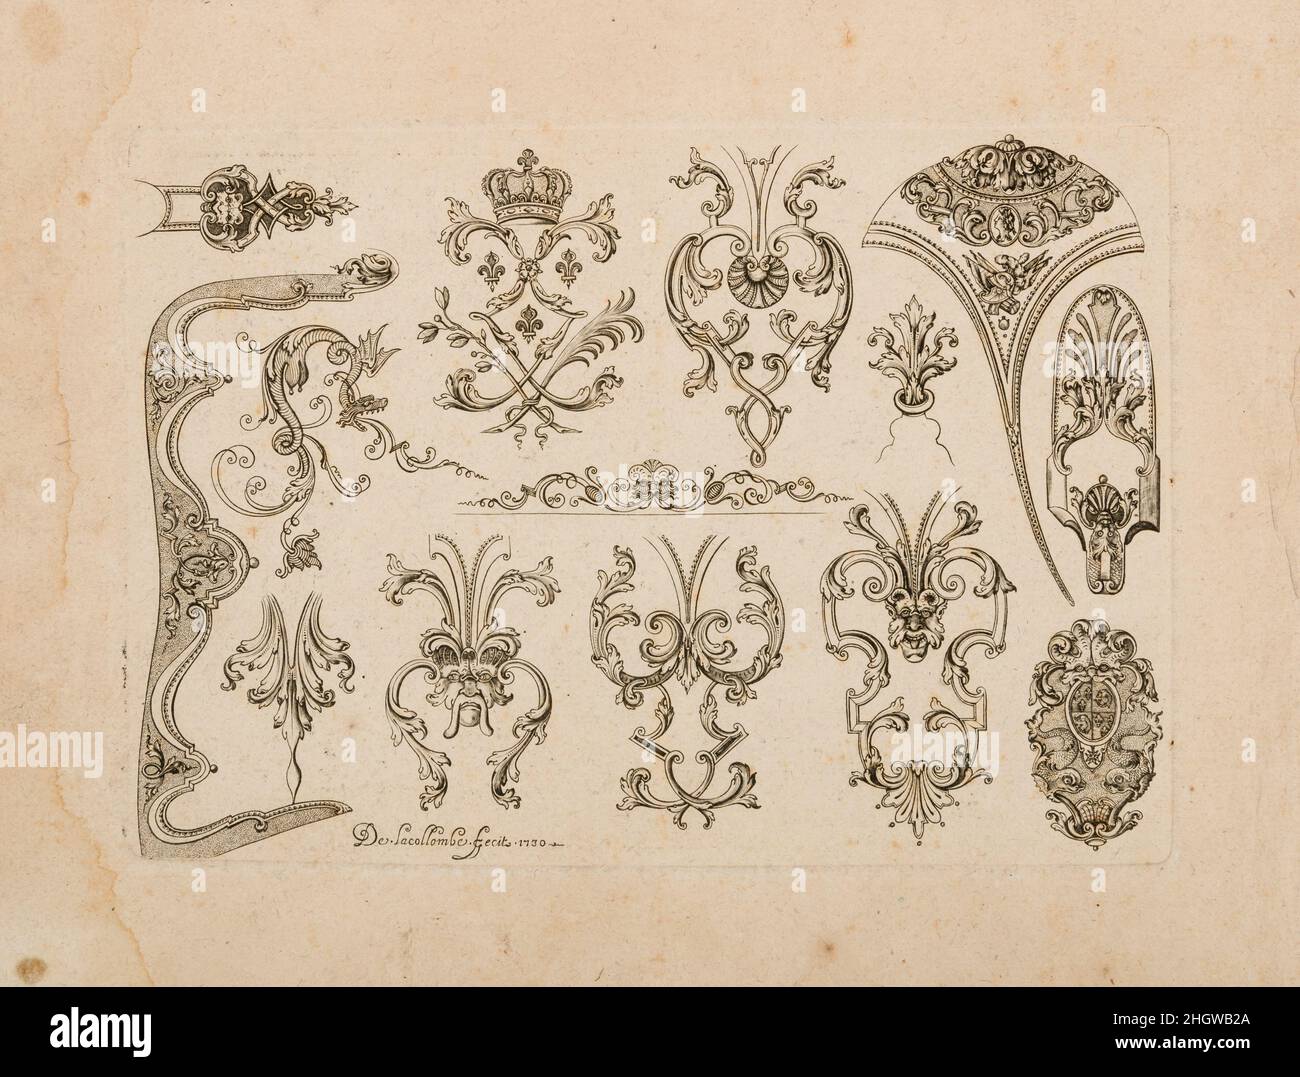 Plate Two from Nouveavx Desseins D'Arquebvseries dated 1730 De Lacollombe This print is a prime example of French designs for the decoration of firearms in the late rococo style, which set the fashion for luxury arms across Europe at the time. It was created by an enigmatic engraver known only as De Lacollombe and comes from a series of prints that was added to after his death and then published by his better-known pupil Gilles Demarteau (1722–1776) in about 1749. Individual motifs taken from them can be seen on guns made throughout the eighteenth century in France, Germany, the Netherlands, I Stock Photo